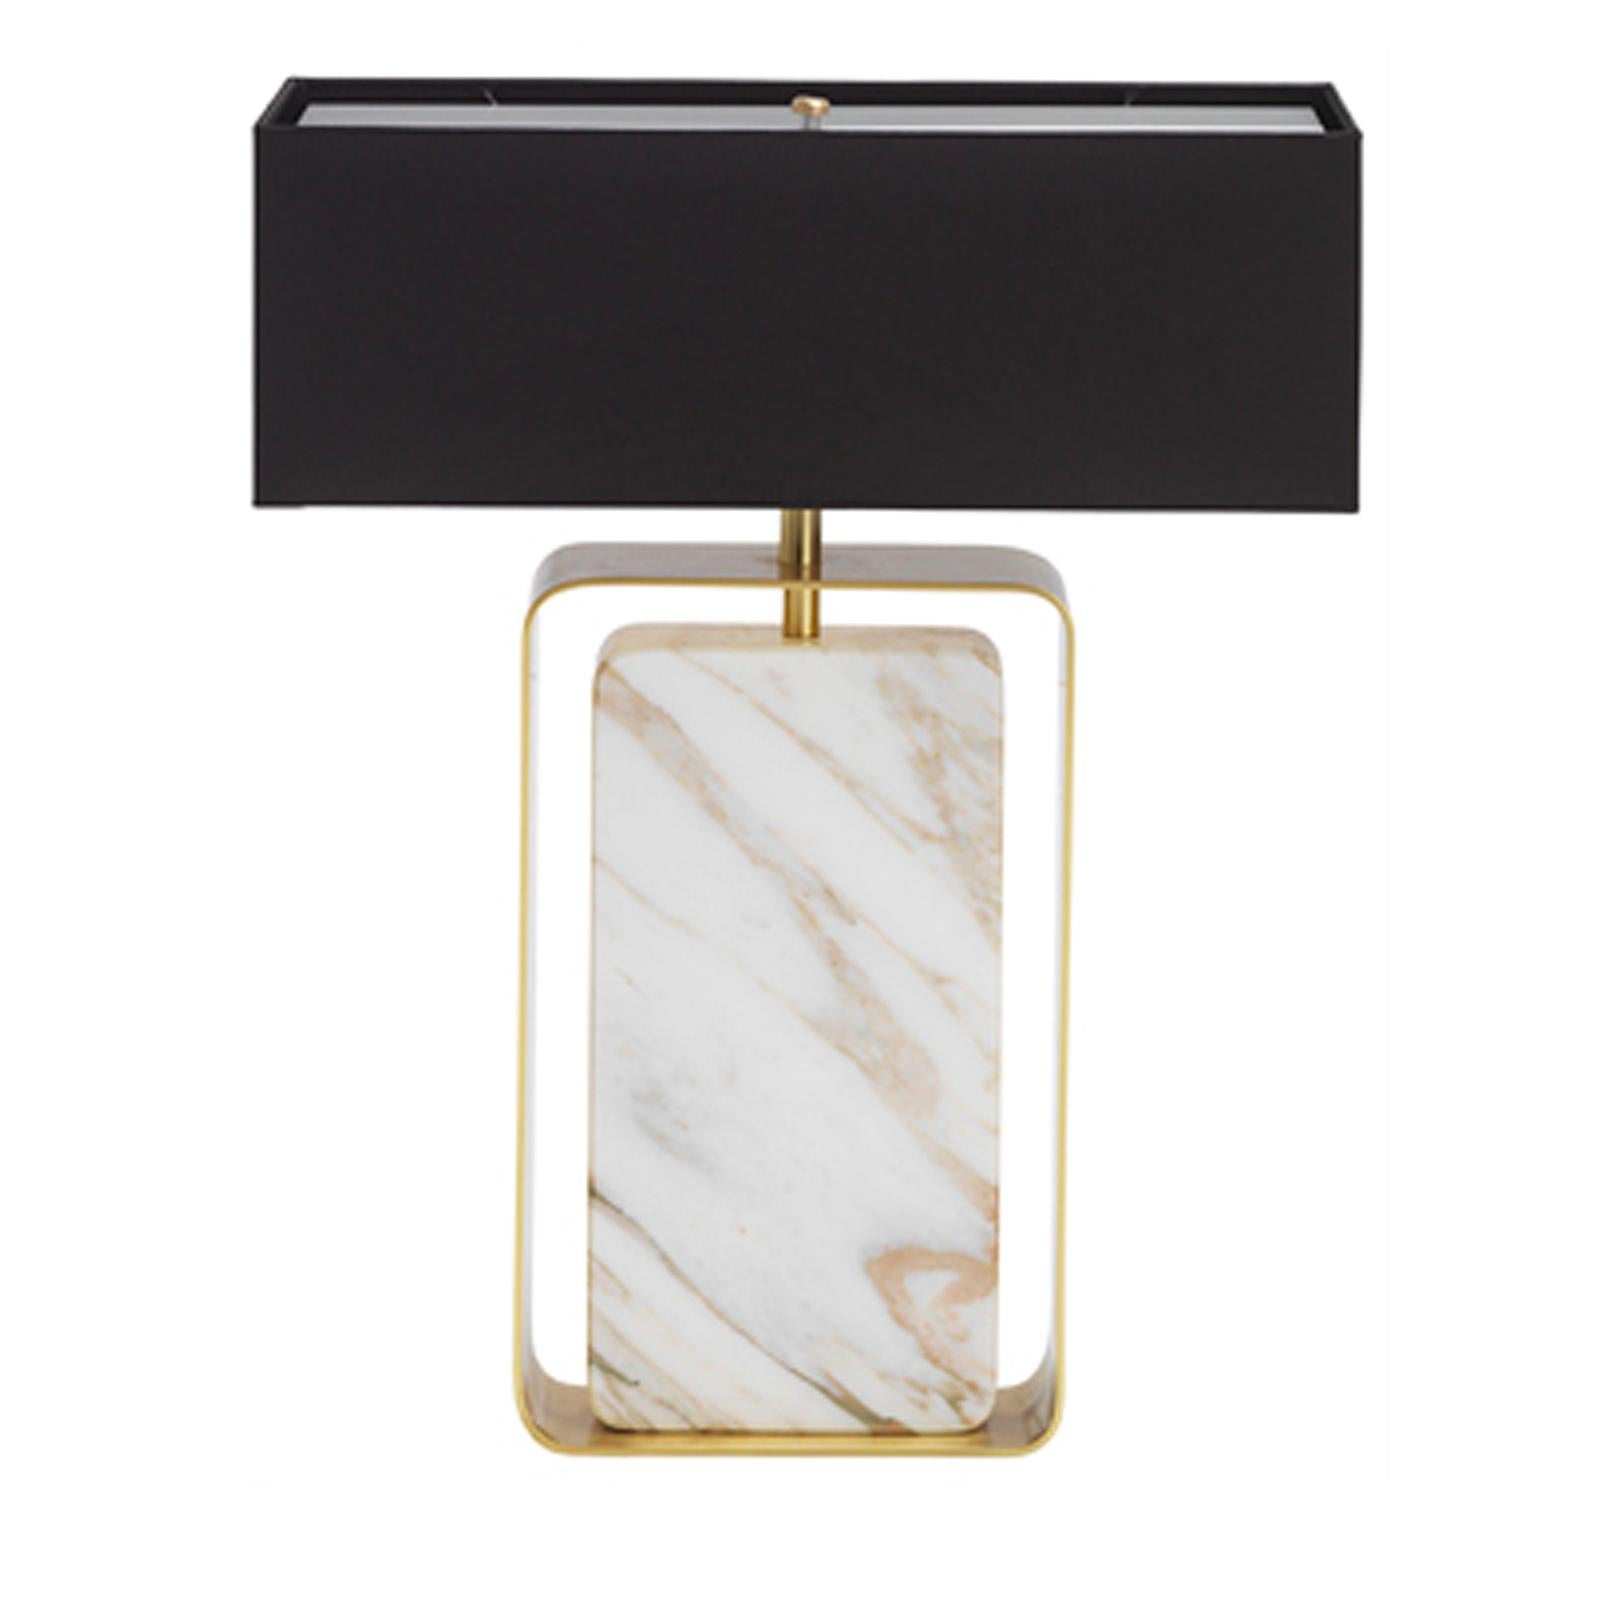 From a small collection of complementary table lamps in different shapes, the Caccia Rectangular Table Lamp is the definition of refined contemporary style. Featuring a block of Calcatta gold marble encased in brass with a satin finish, the table